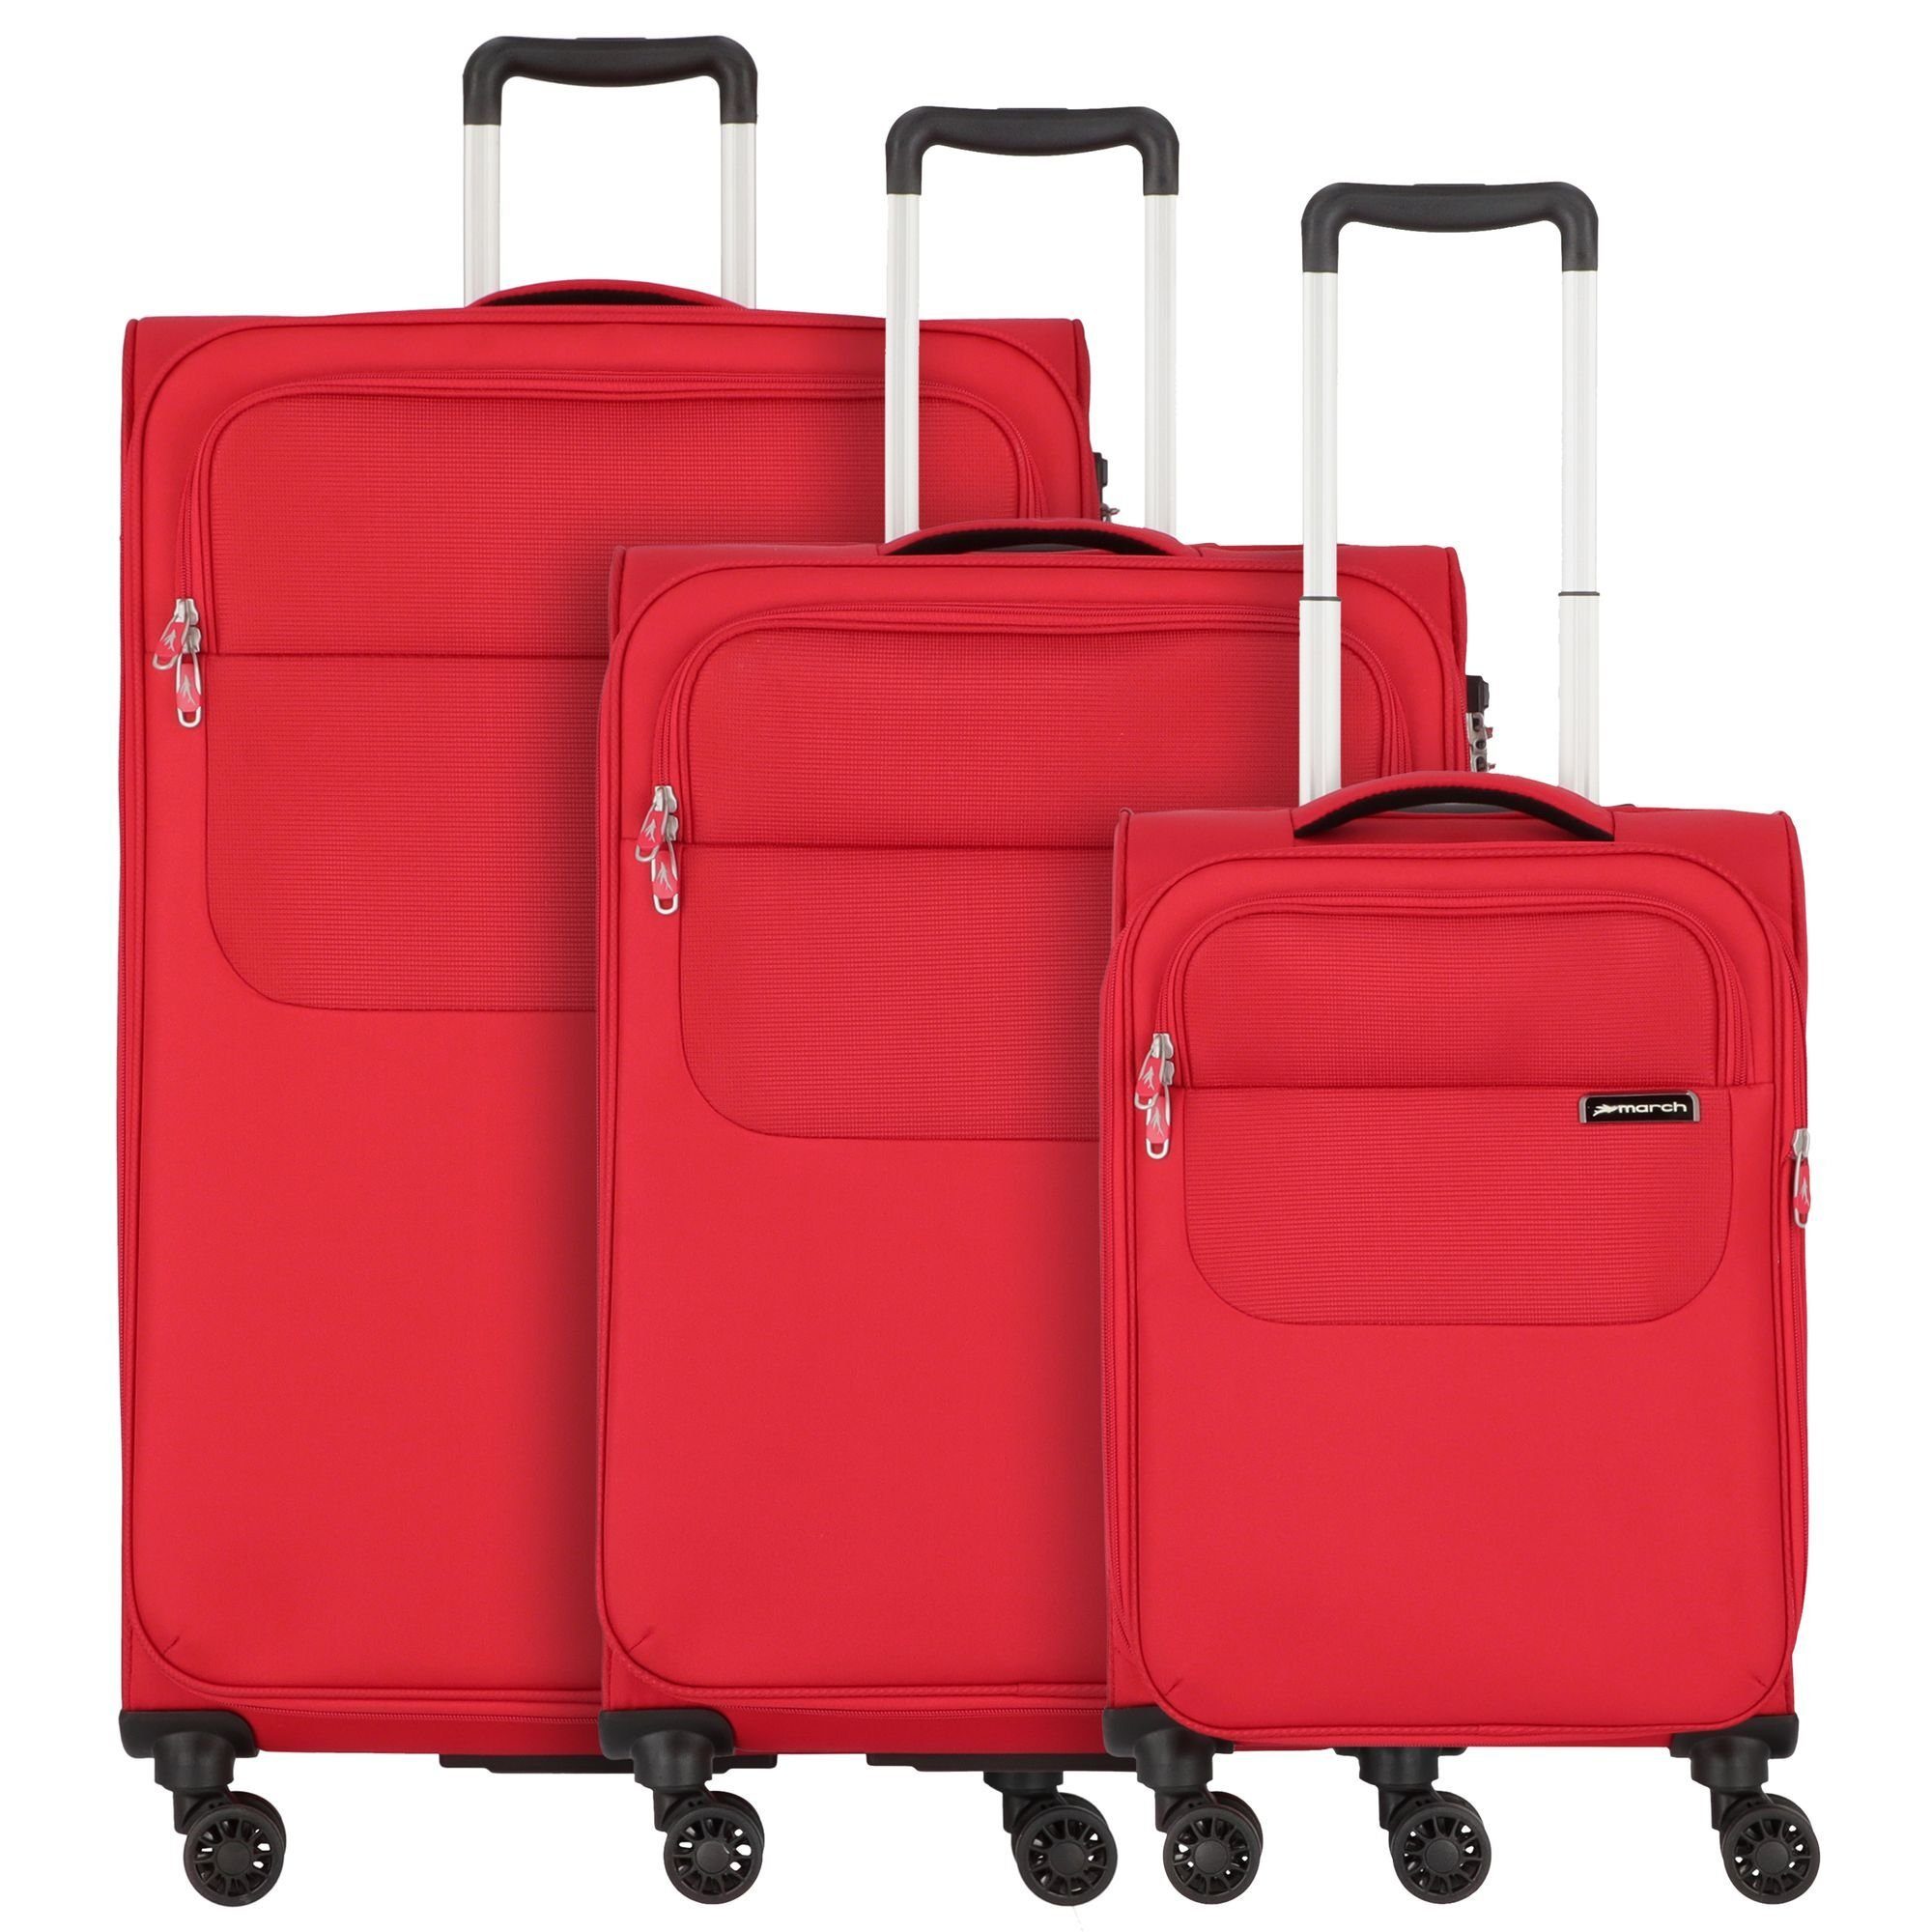 red 4 Rollen, Trading tlg), March15 Polyester 3 (3-teilig, Trolleyset Carter,